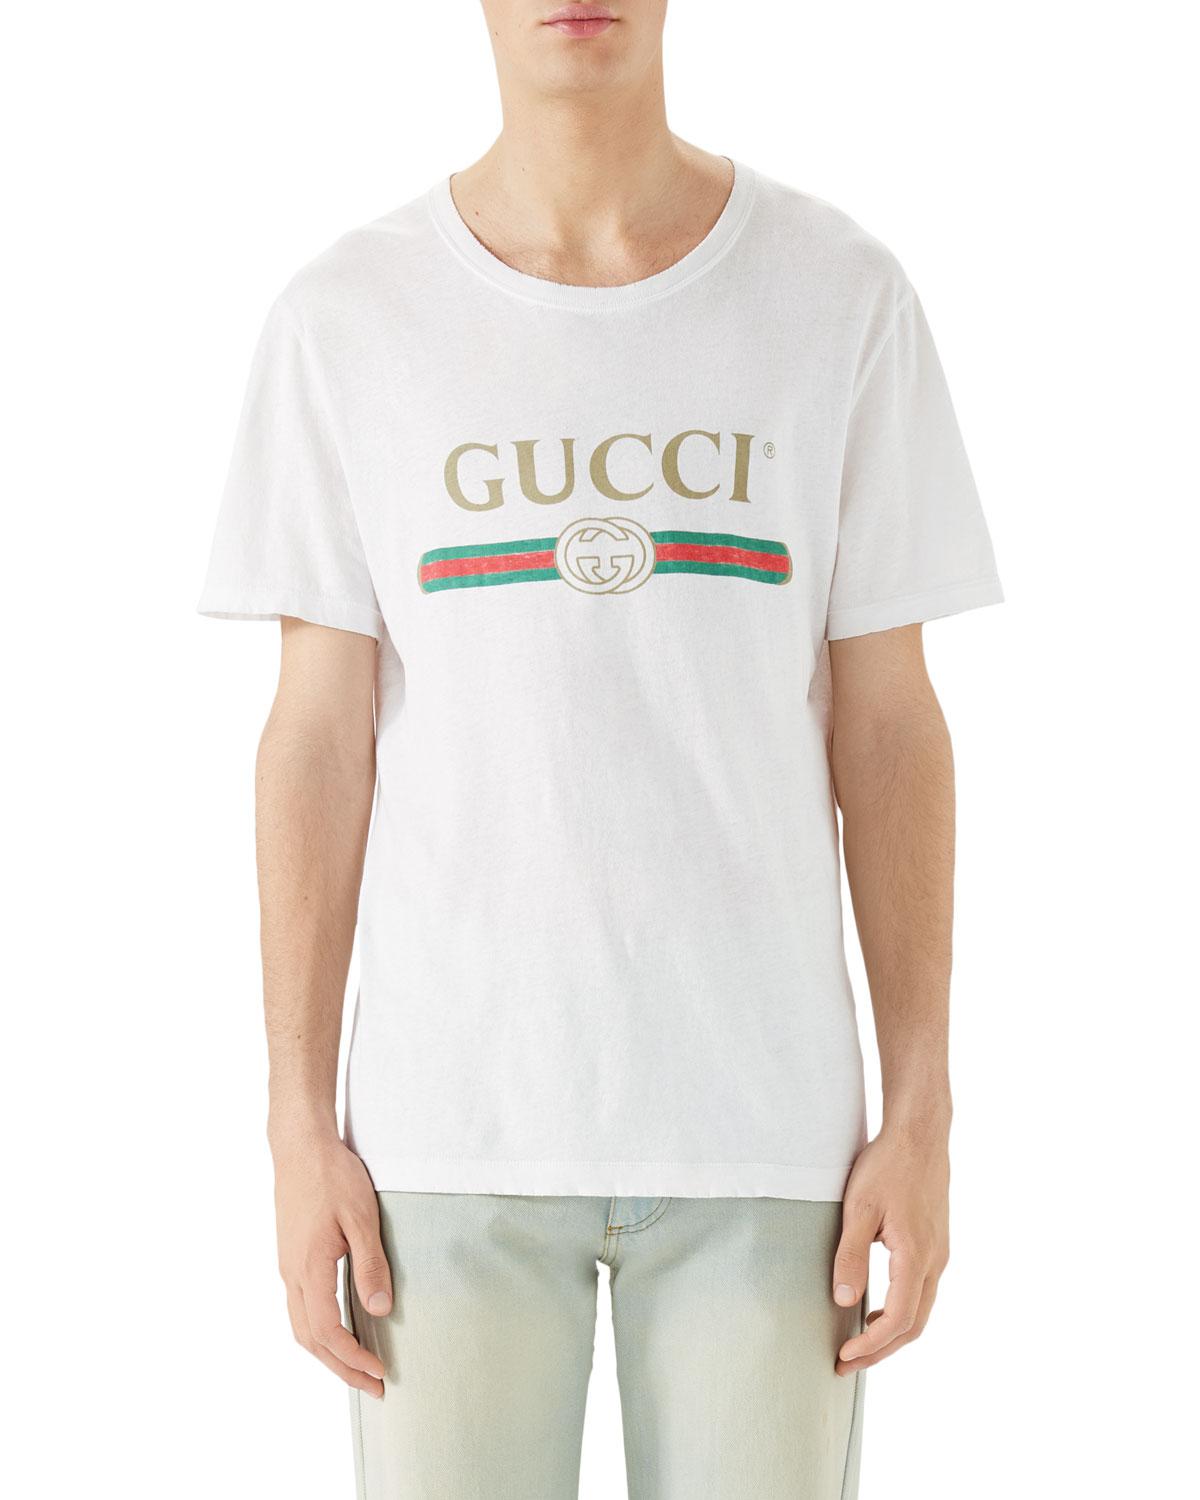 Lyst - Gucci Washed T-shirt w/GG Print in White for Men